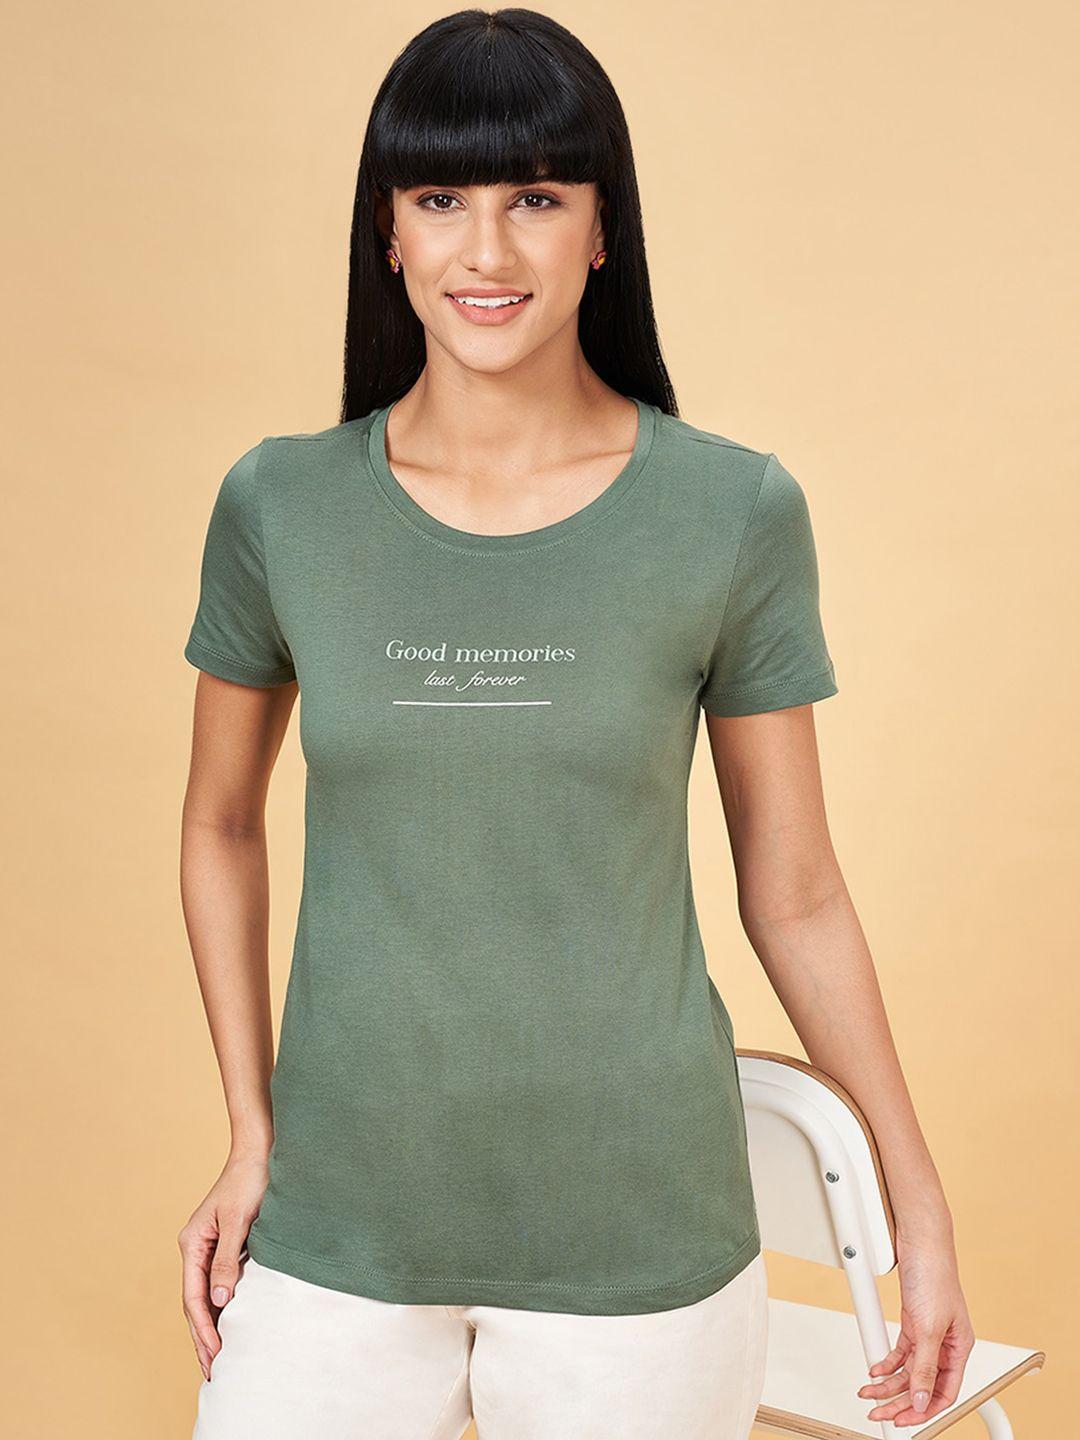 Honey by Pantaloons Typography Printed Round Neck Cotton T-shirt